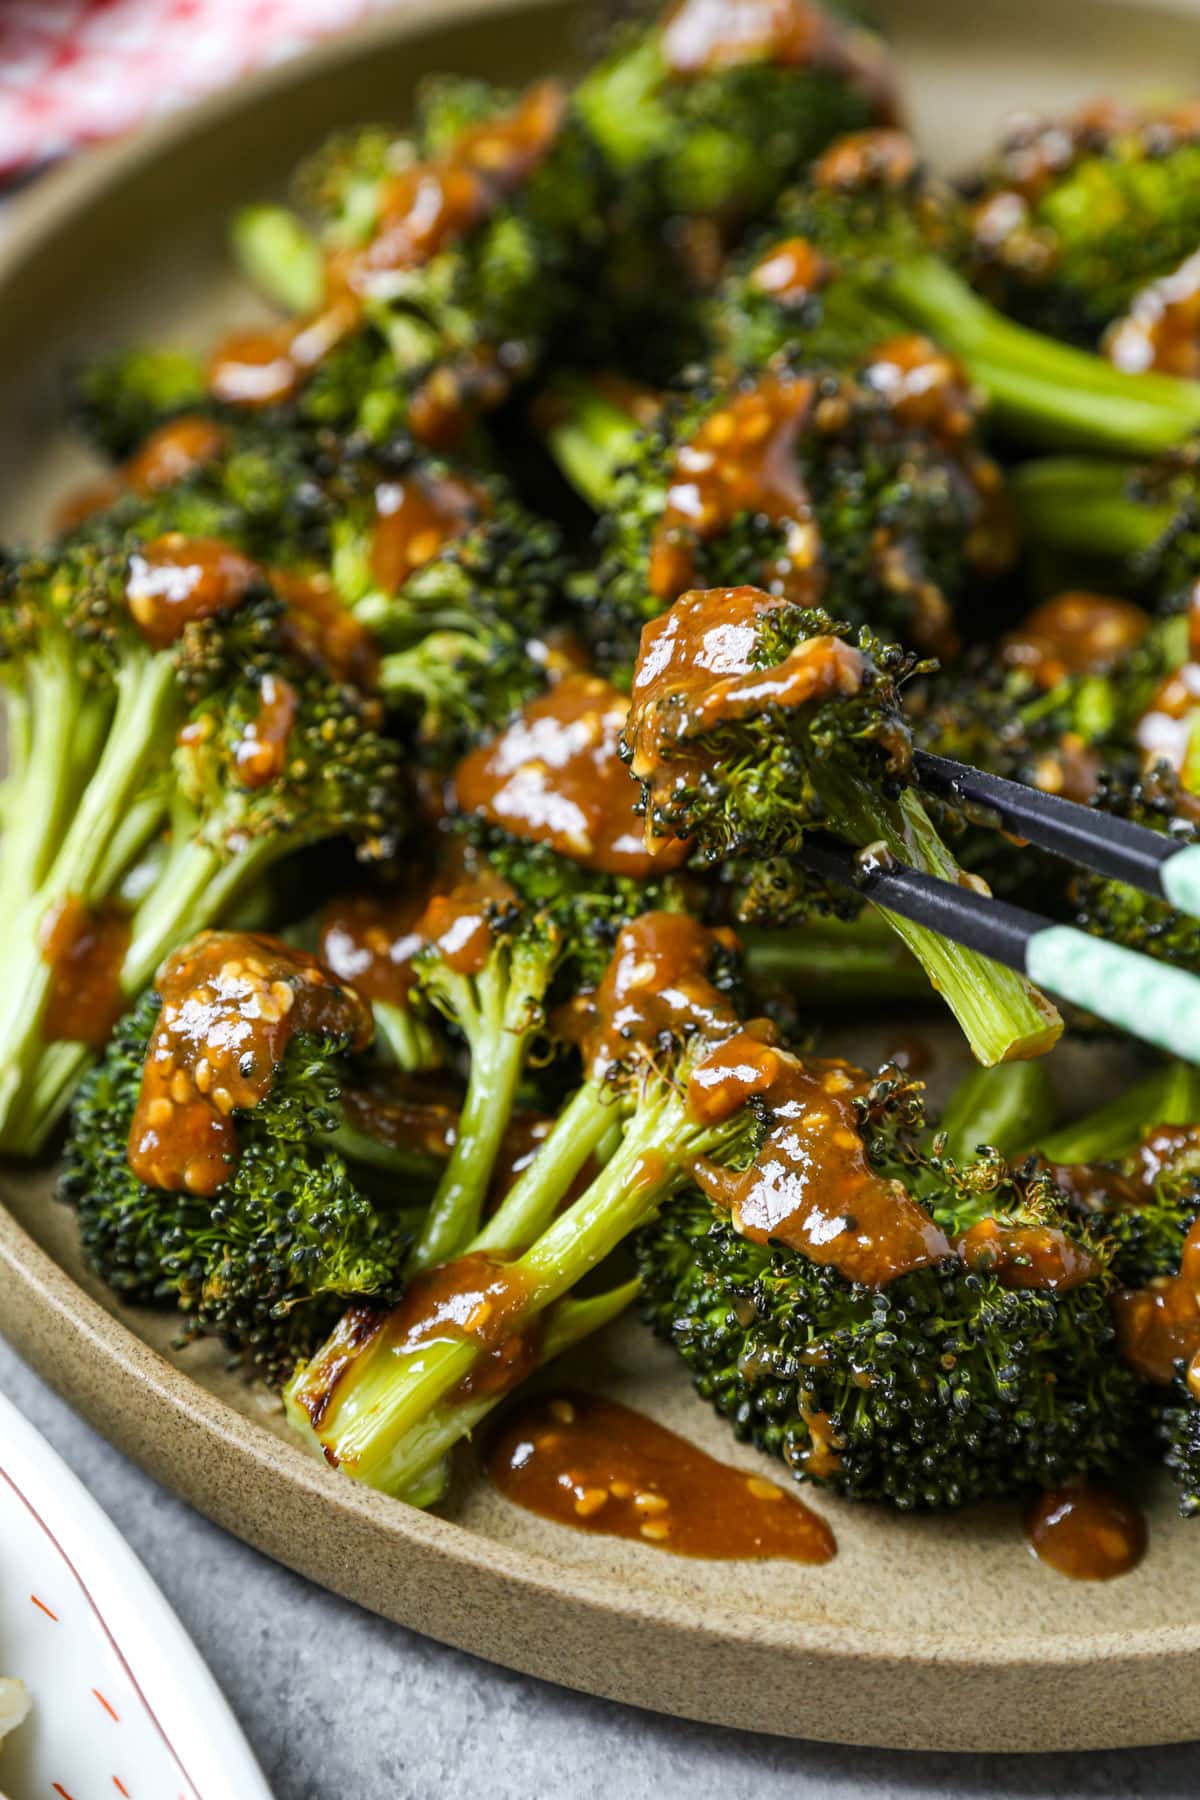 Roasted broccoli with miso sauce